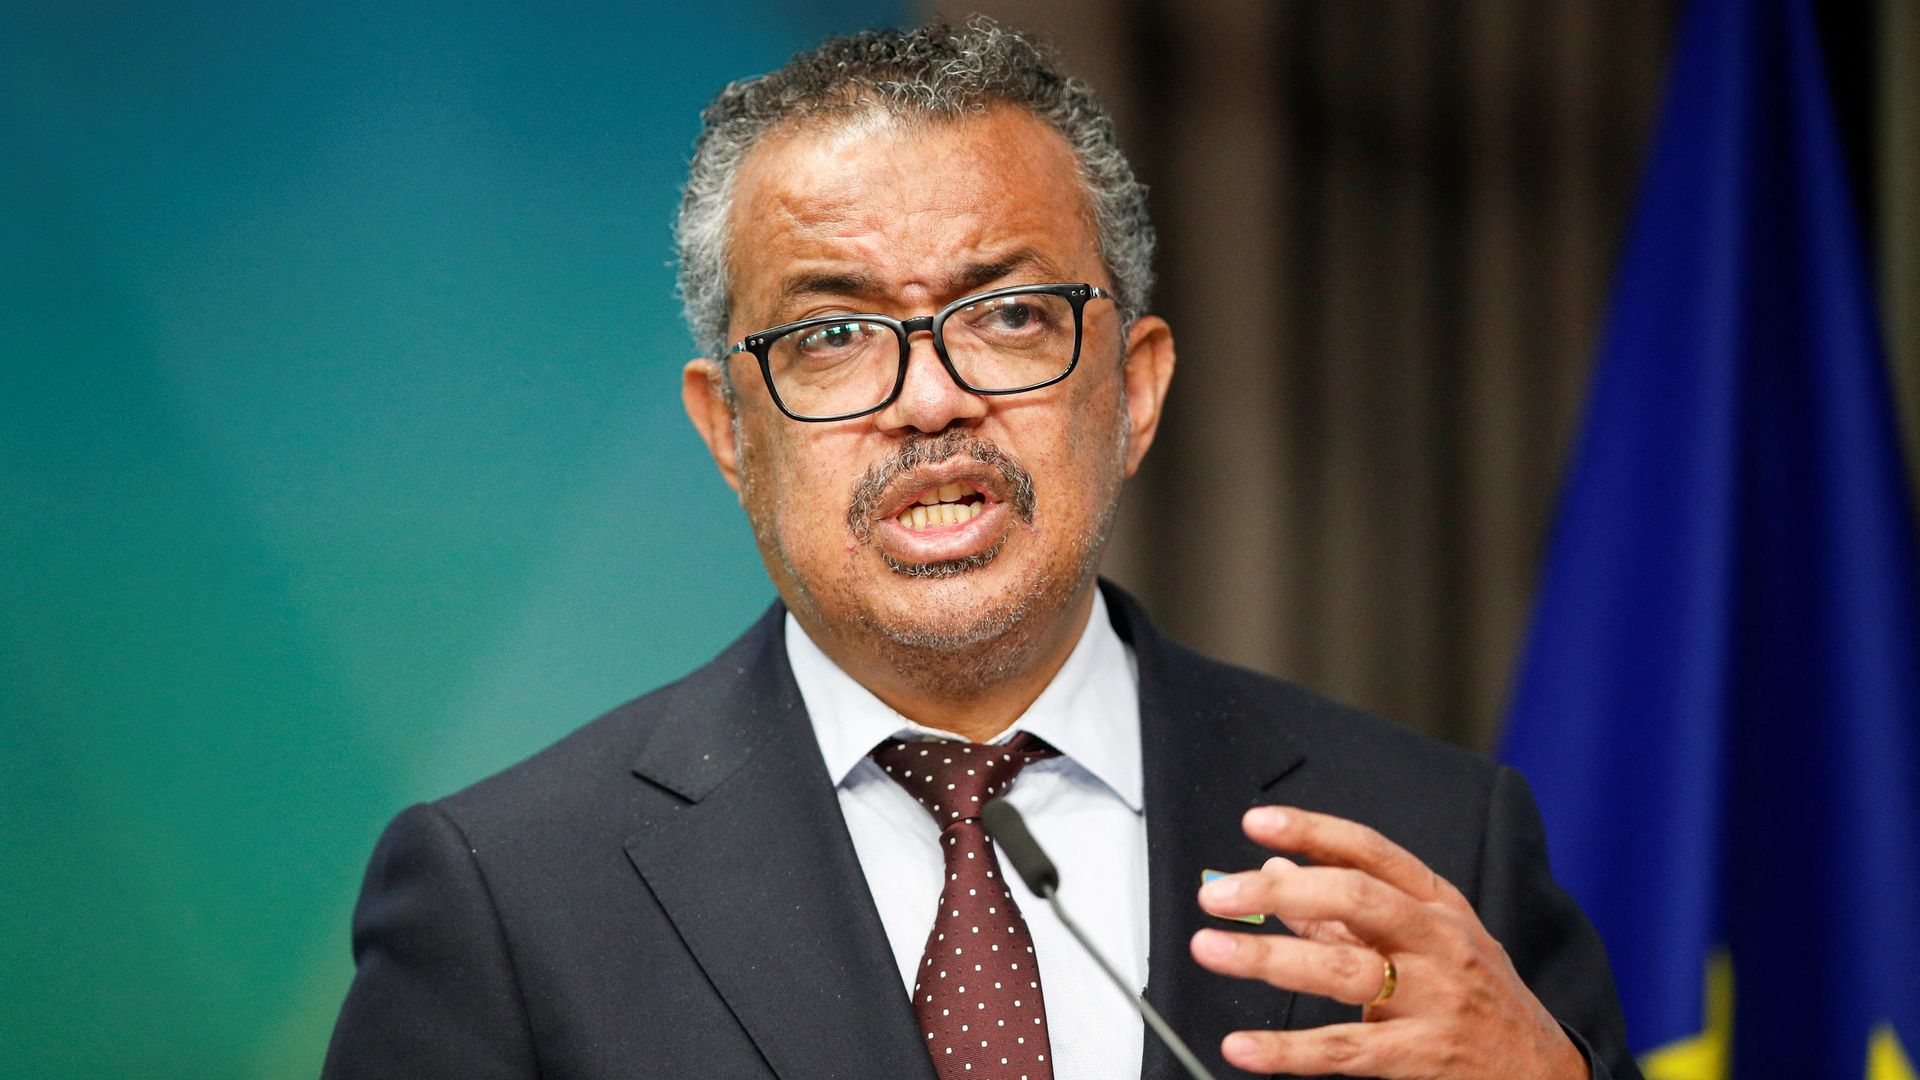 World Health Organization Tedros Adhanom Ghebreyesus gives a statement on the coronavirusat The European Council Building in Brussels on February 18, 2022.